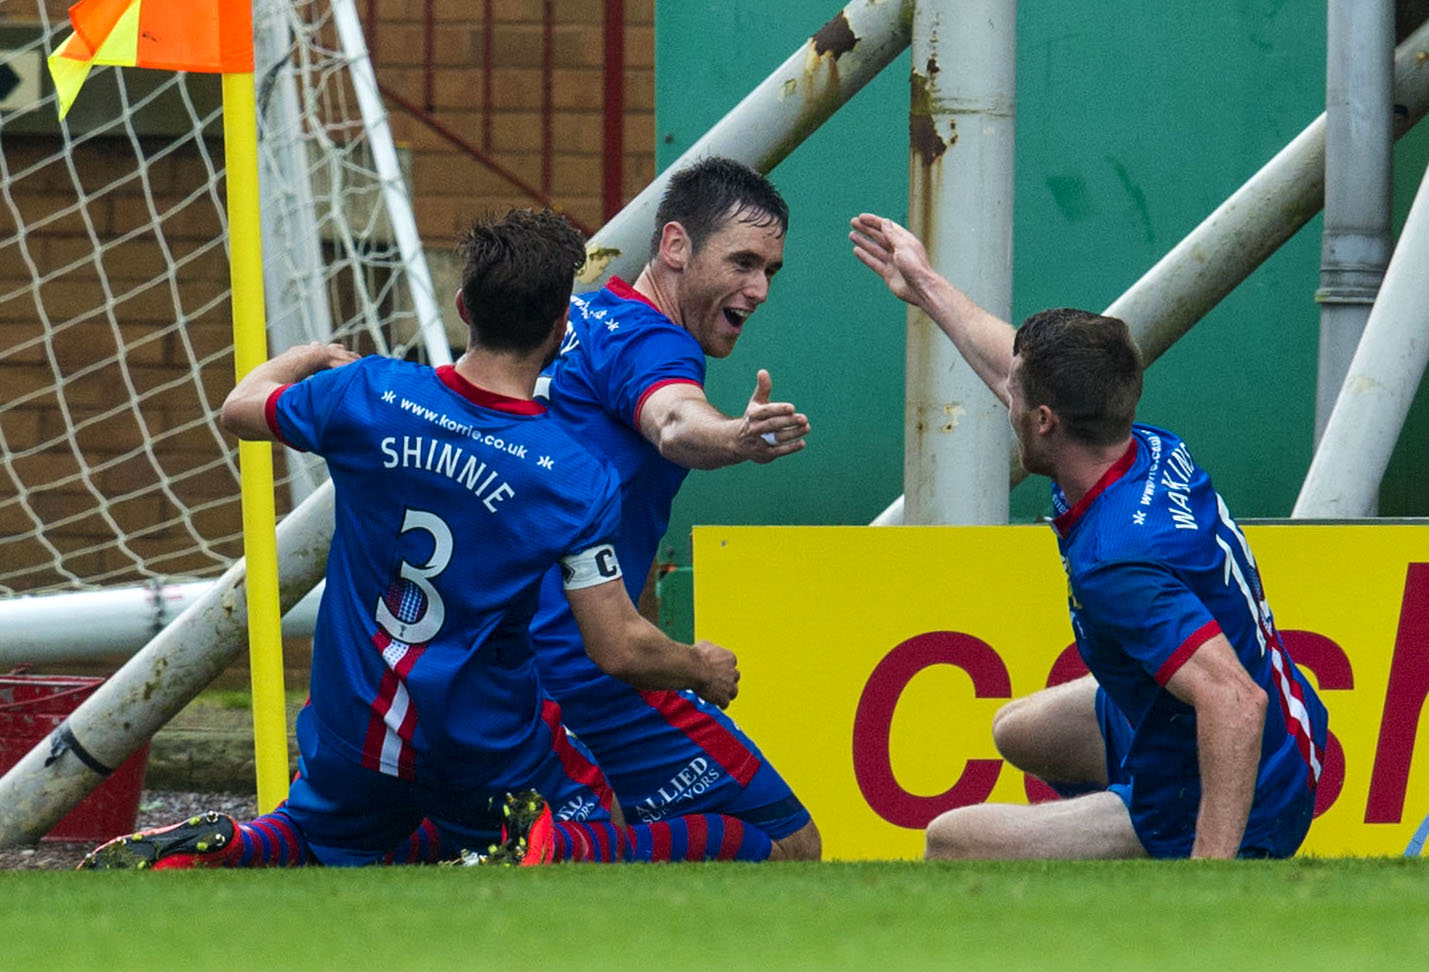 ICT's Greg Tansey (centre) celebrates a goal against Motherwell in August 2014 with fellow team-mates Graeme Shinnie (left) and Marley Watkins.